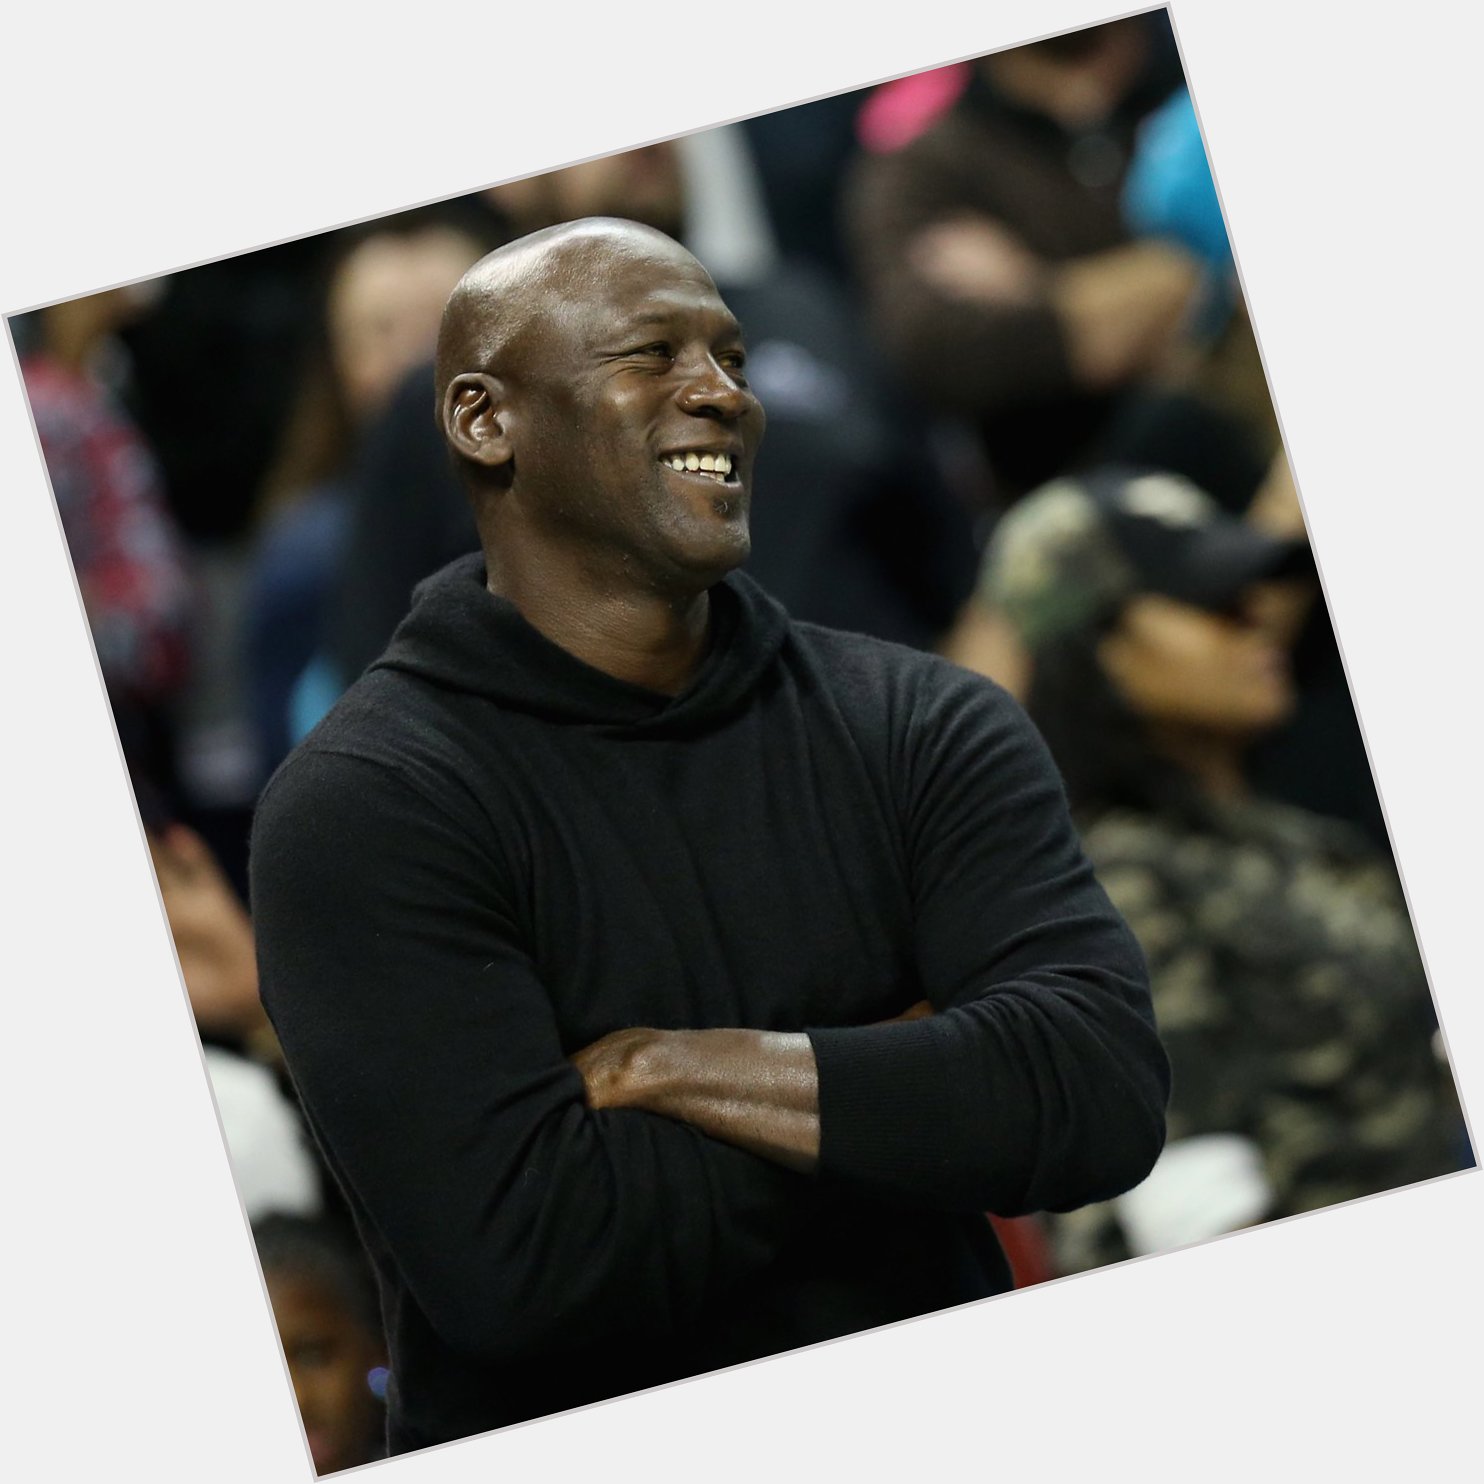 Wishing a HAPPY BIRTHDAY to our Hornets owner, Michael Jordan! 